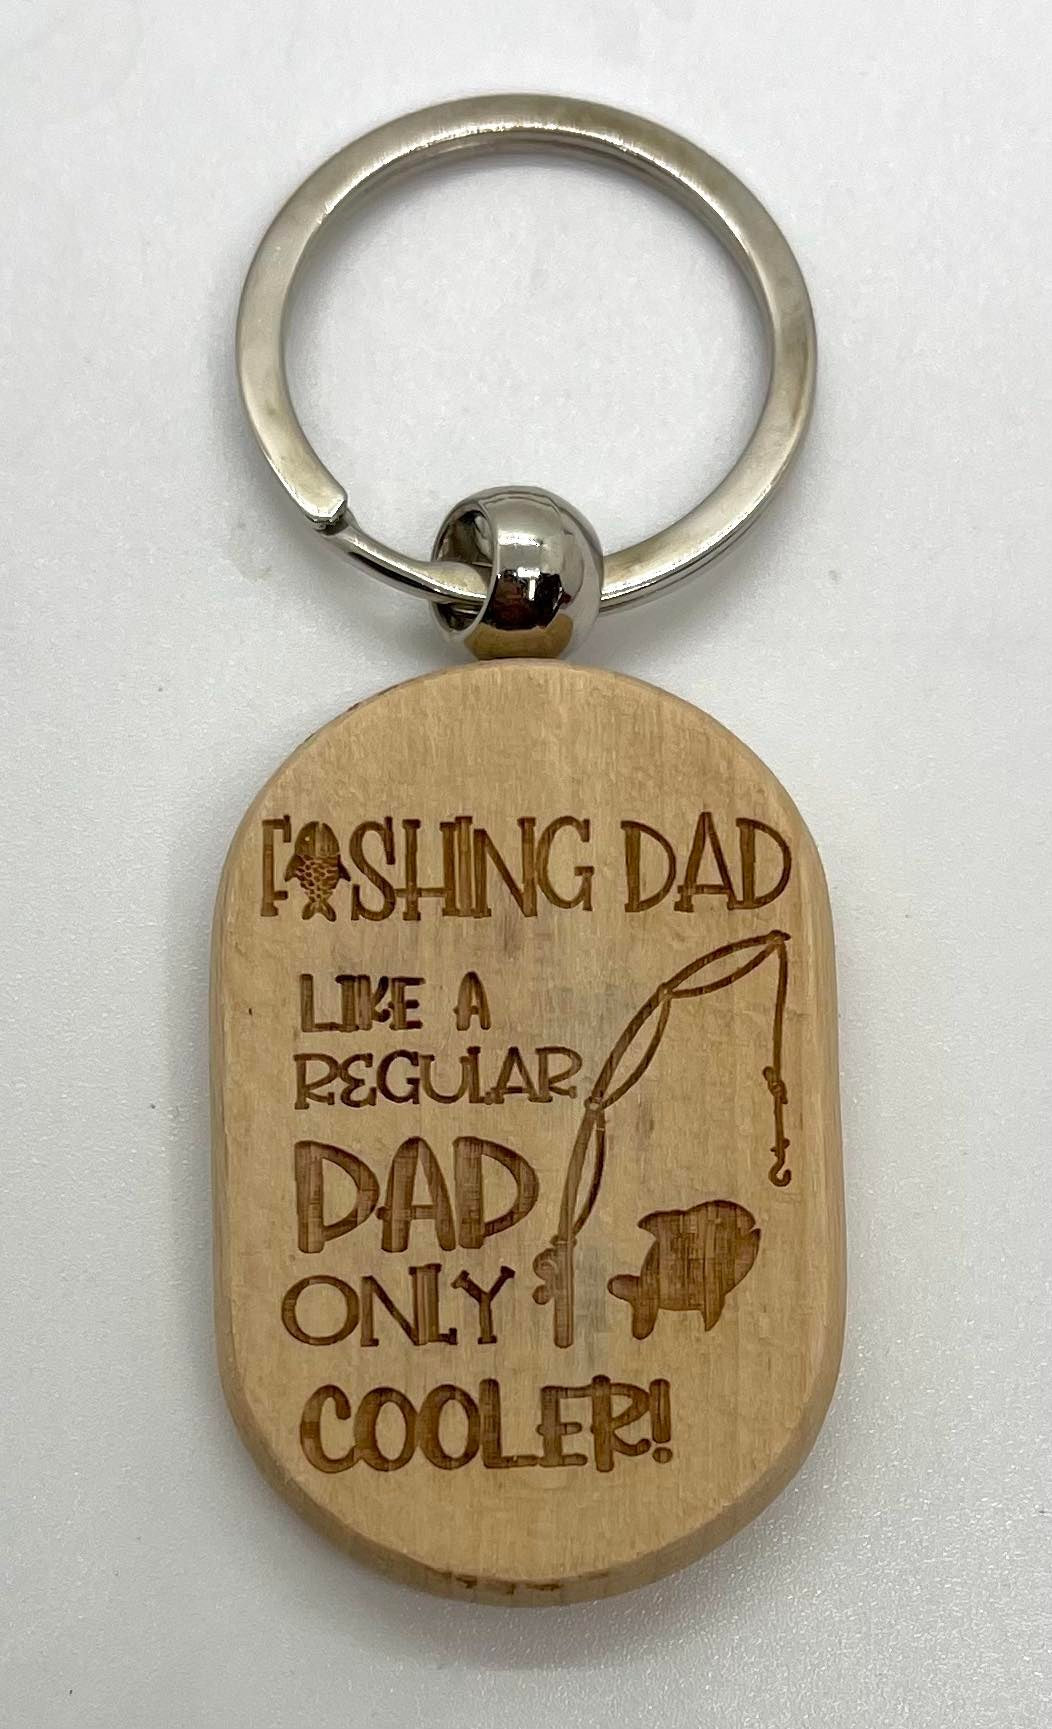 Personalized Wood Keychains, Father's Day Gifts, Graduation, Groomsman, Laser Engraved Keychains